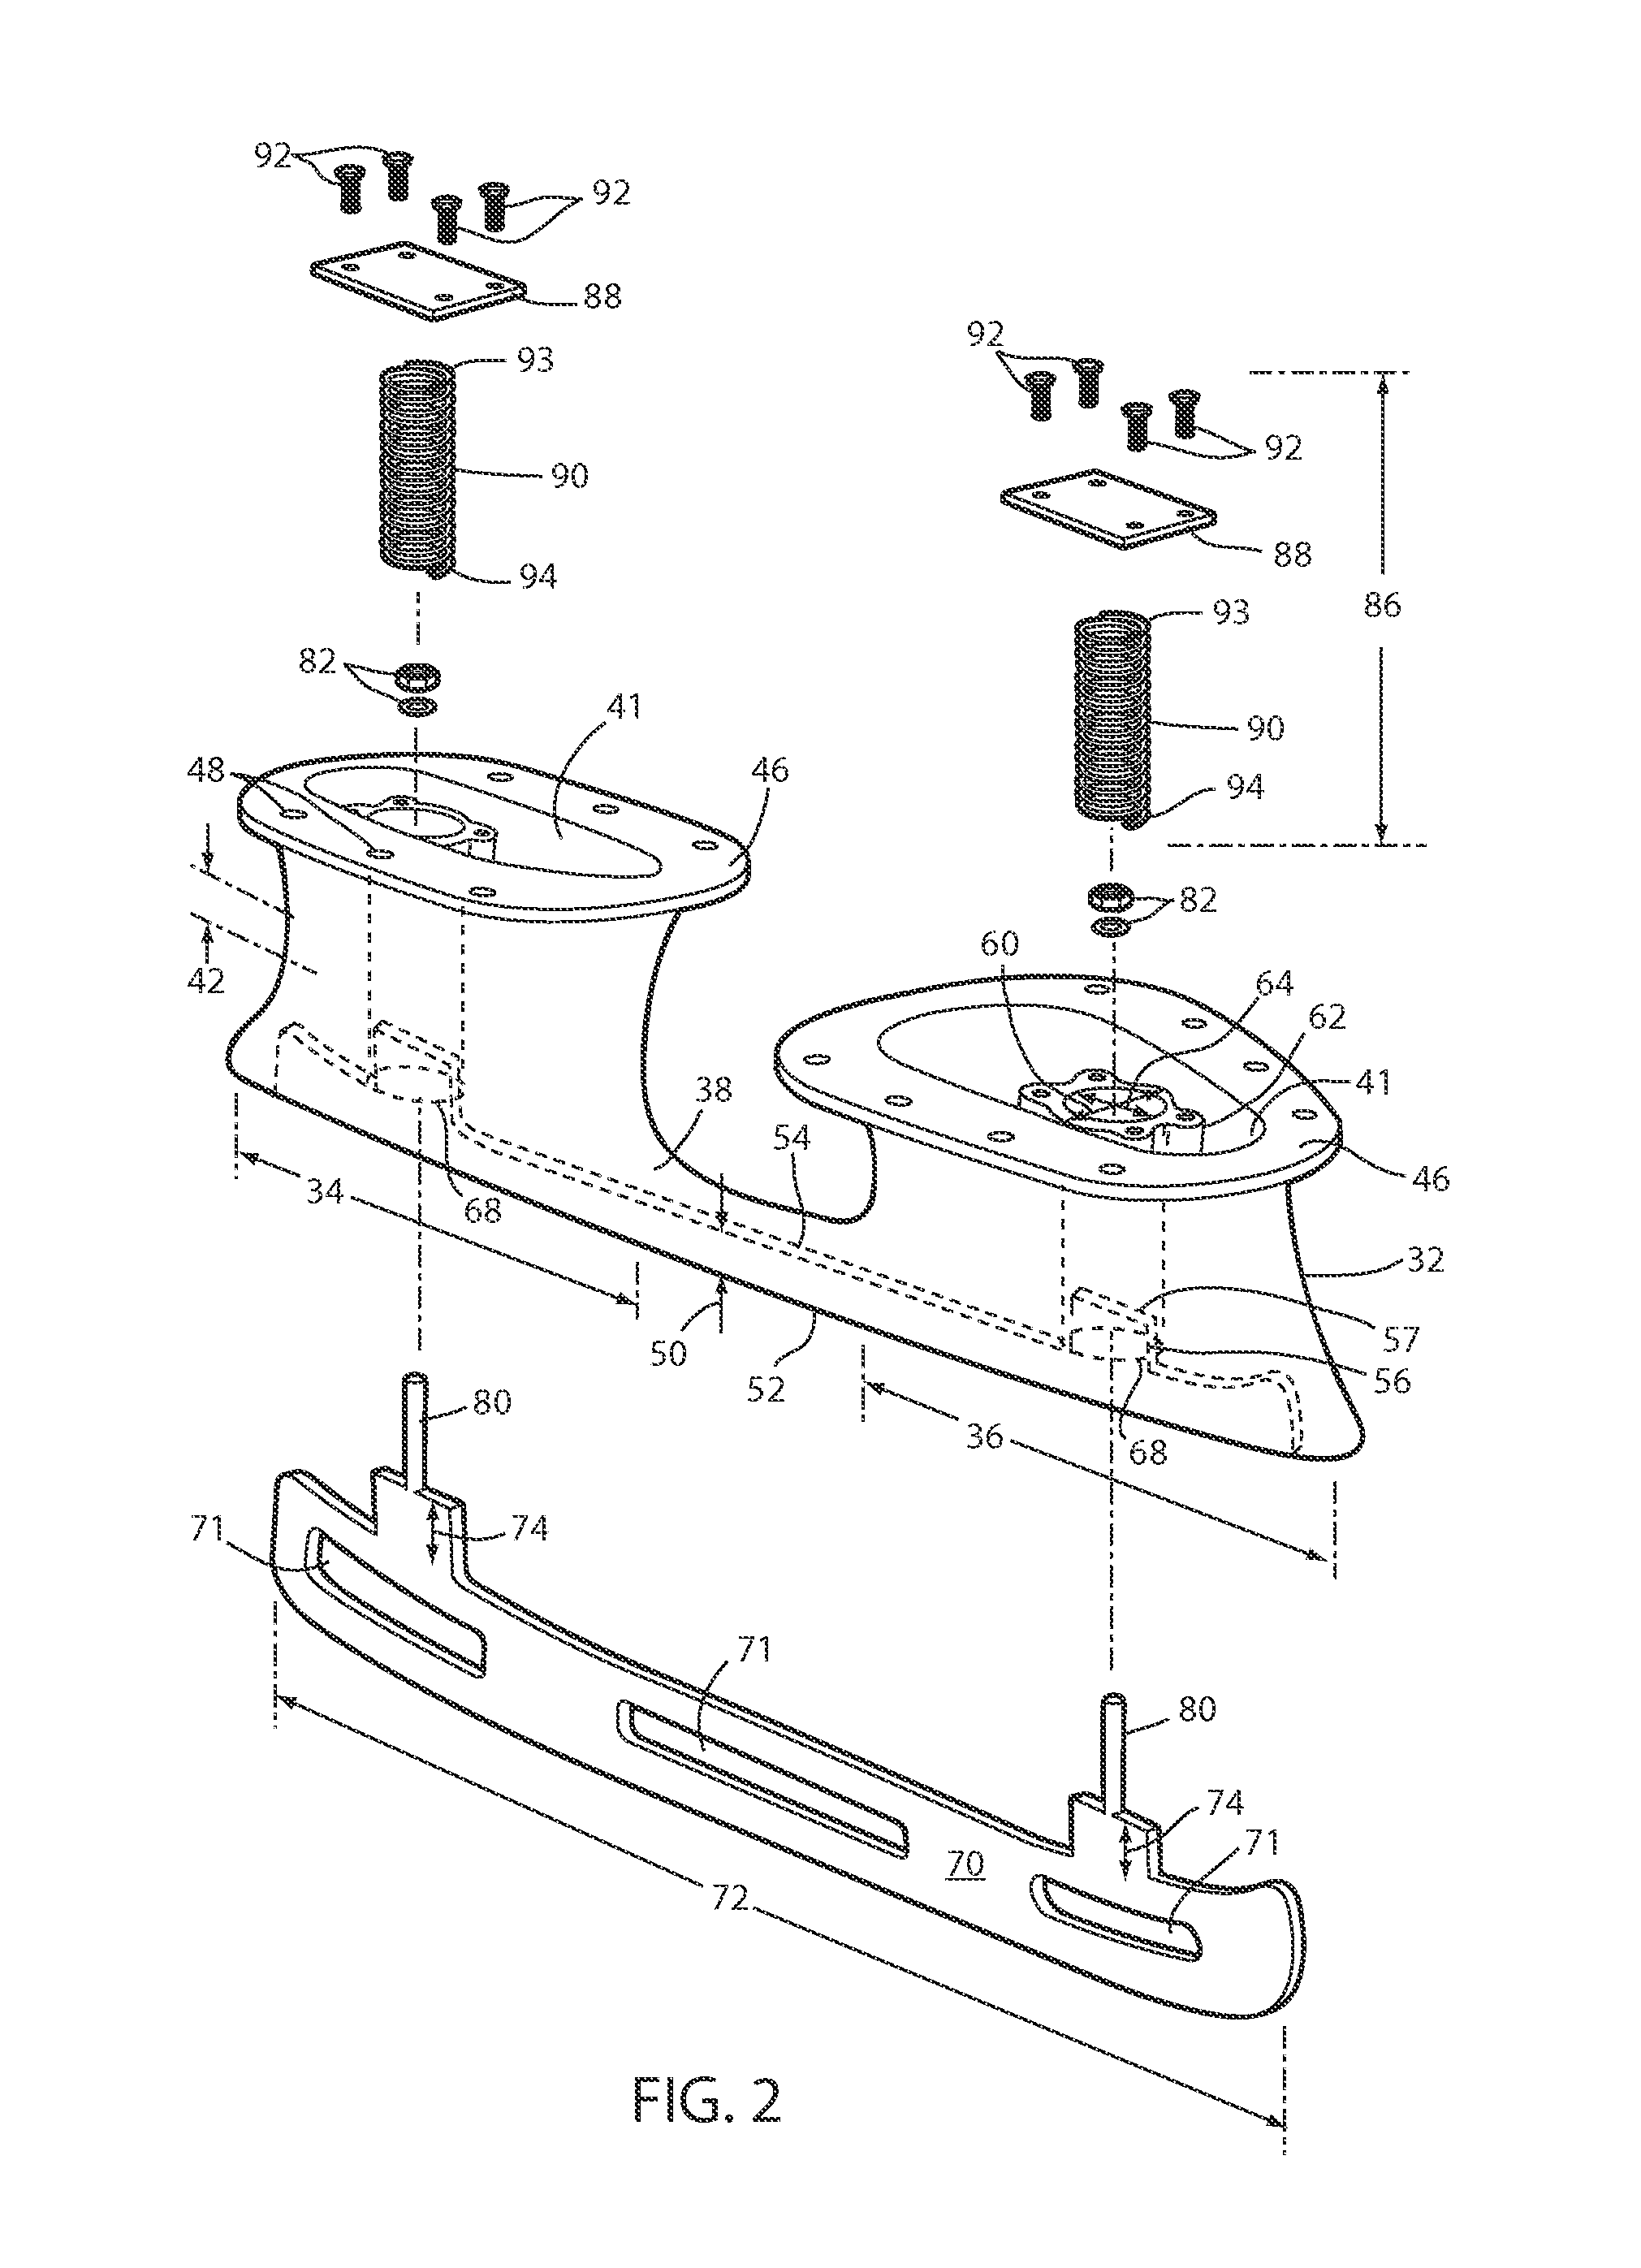 Skate suspension system and method of assembly